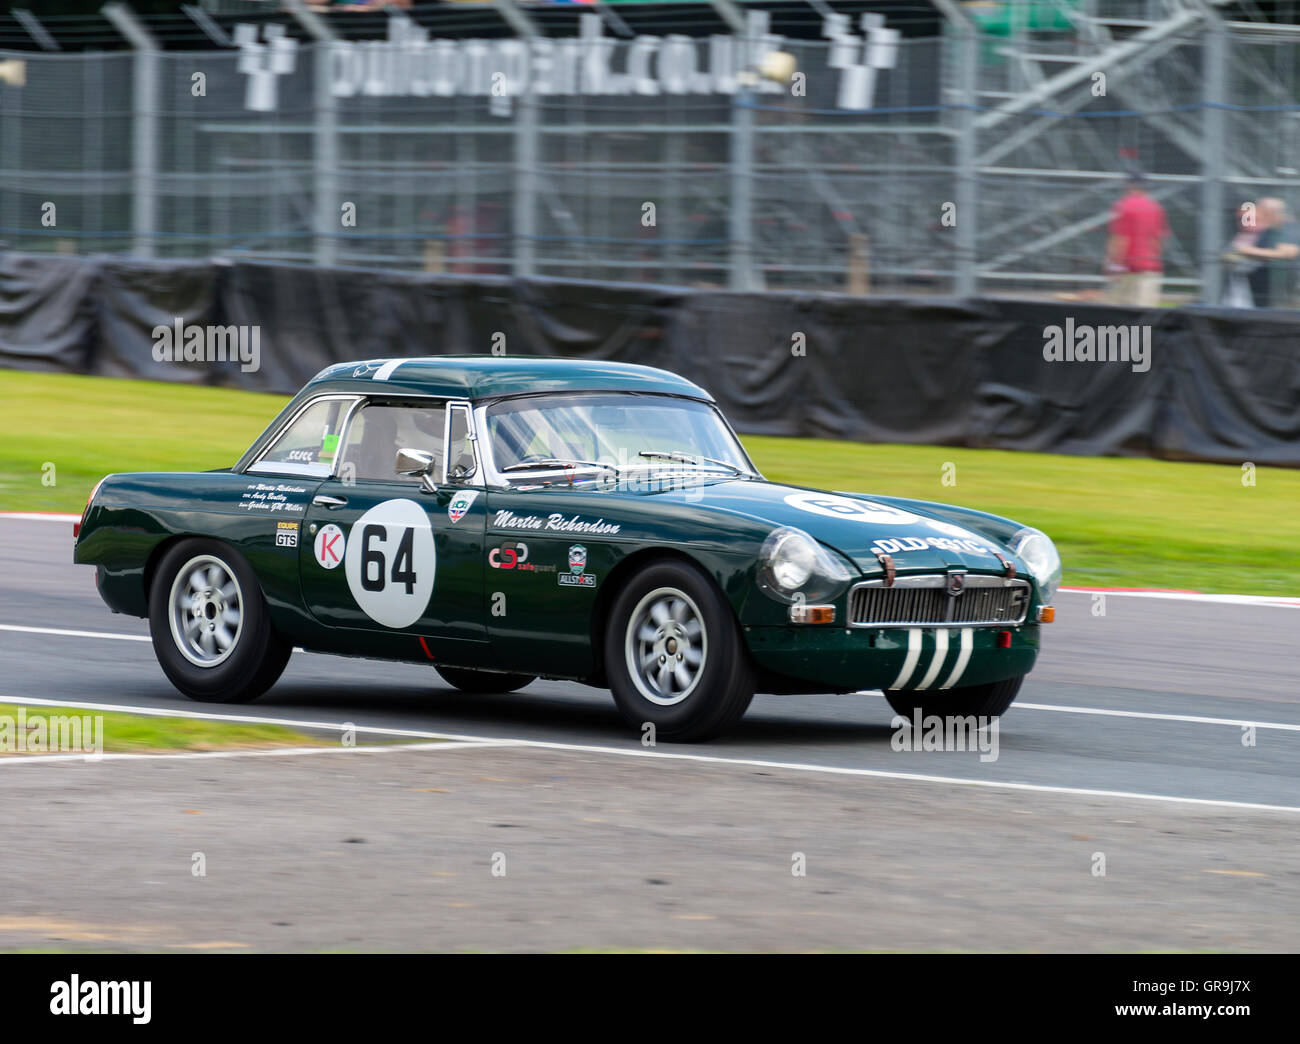 An MGB Sports Car in the Guards Trophy Race at Oulton Park Motor Racing Circuit near Tarporley Cheshire England United Kingdom UK Stock Photo